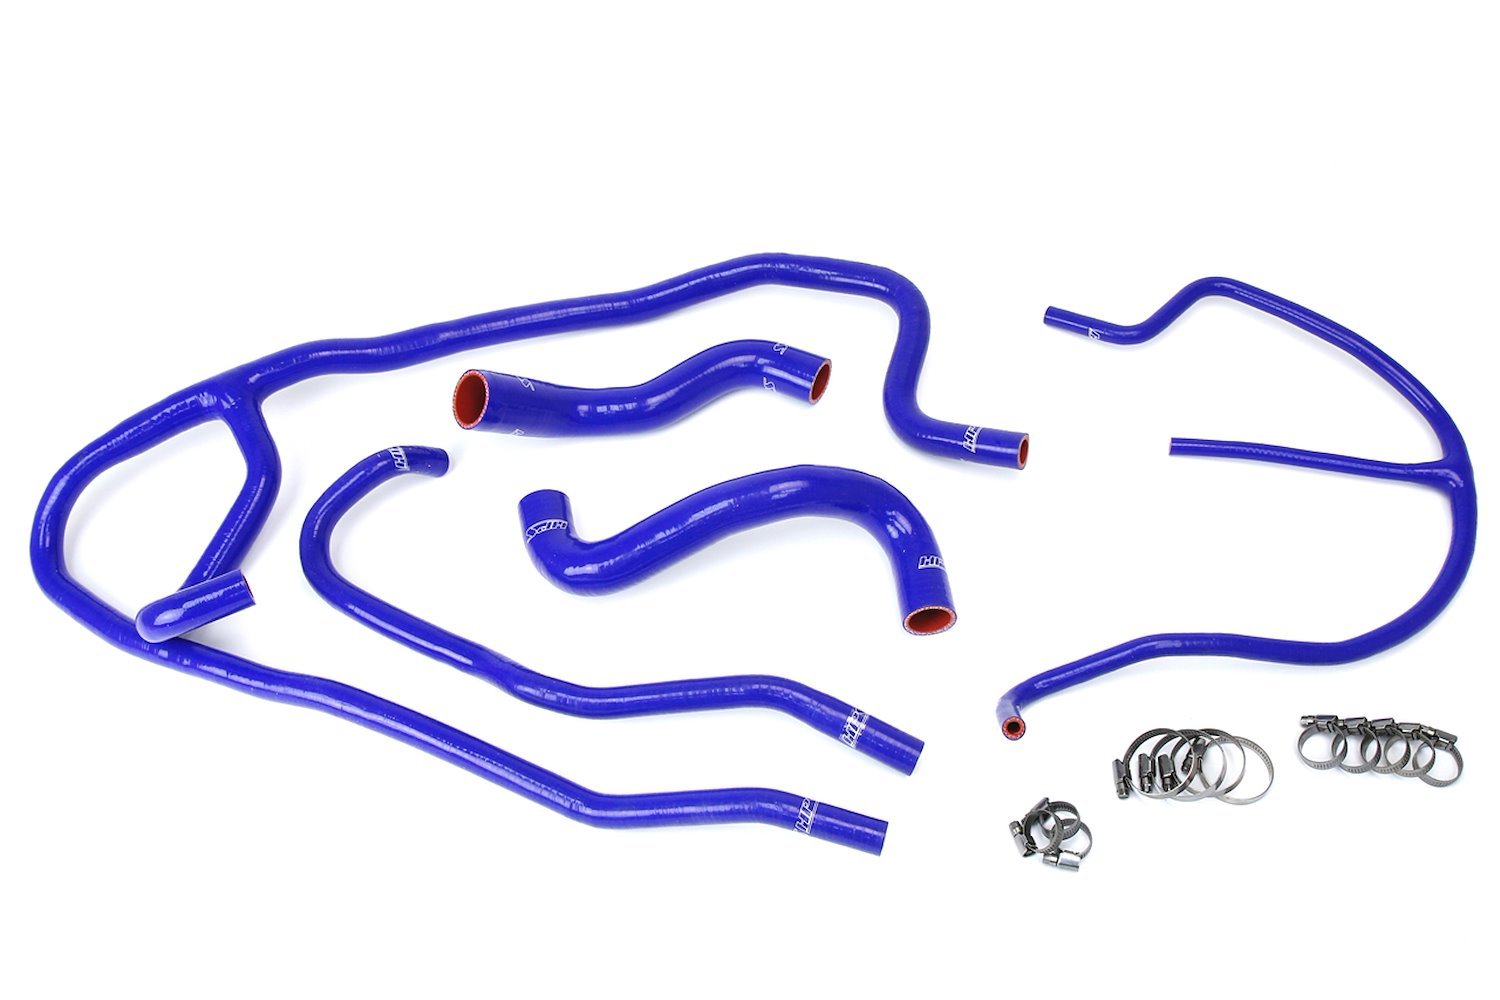 57-1276-BLUE Coolant Hose Kit, High-Temp 3-Ply Reinforced Silicone, Replace Rubber Radiator Heater Coolant Hoses